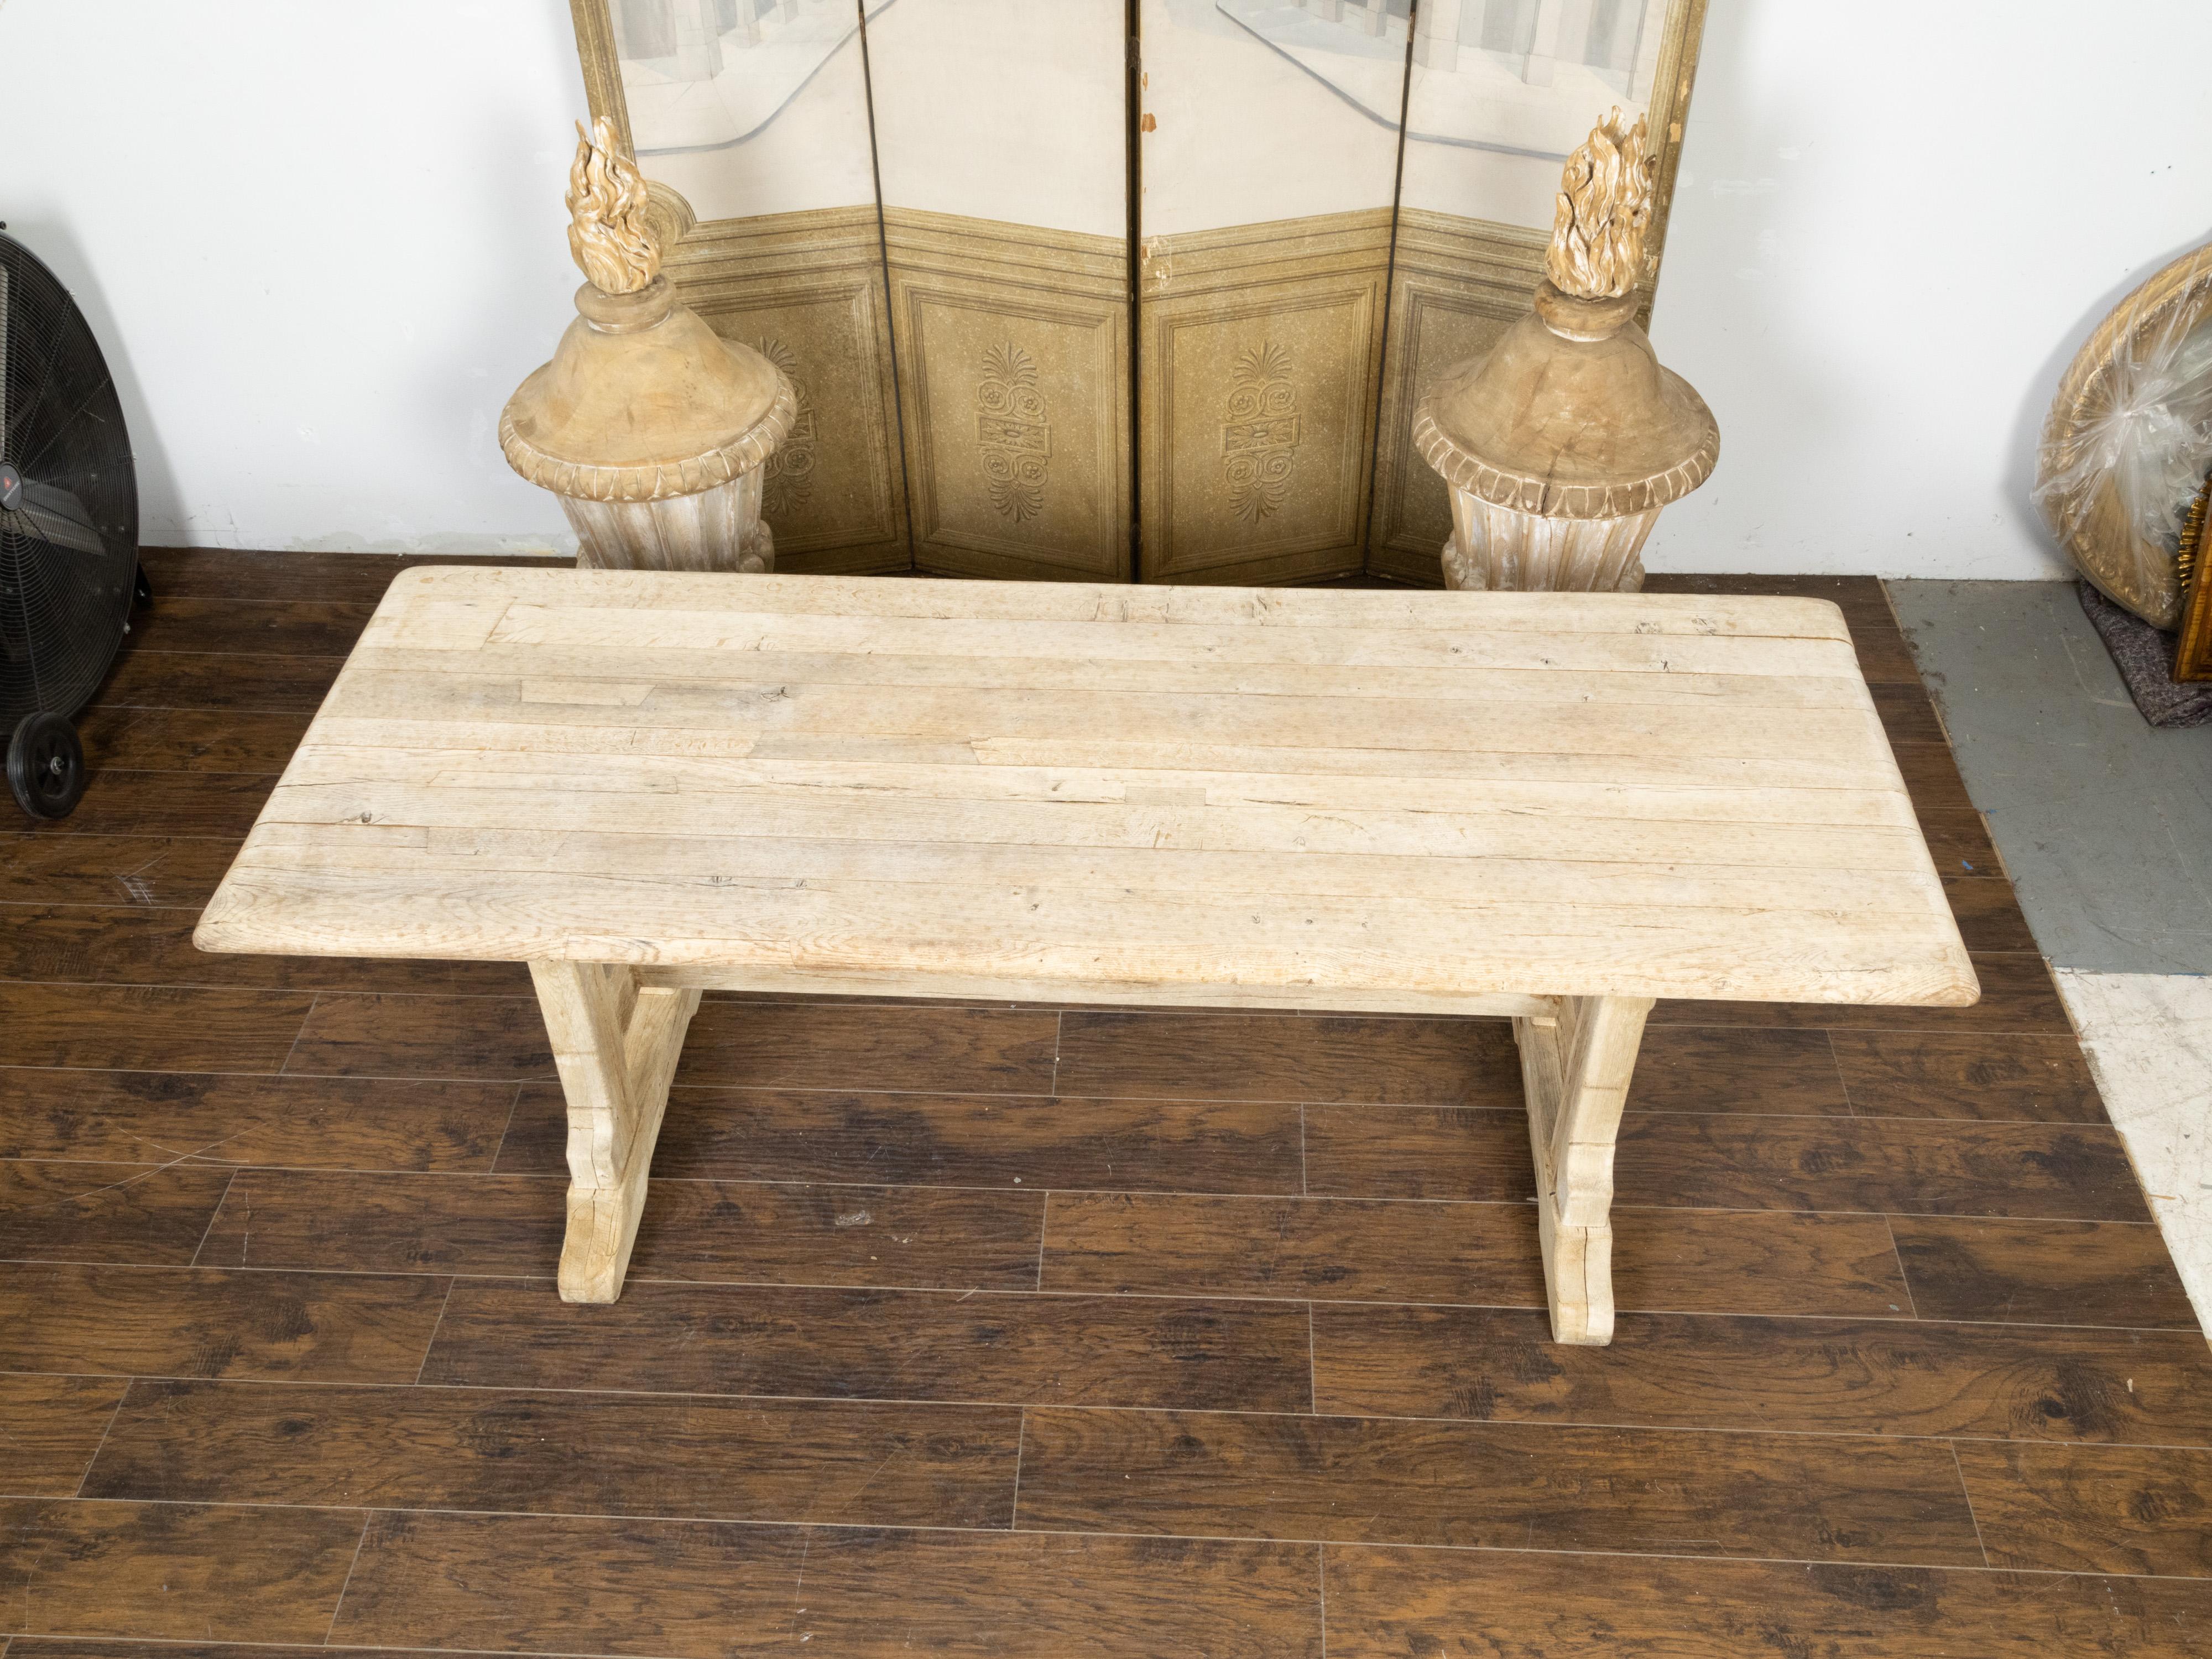 Rustic English 19th Century Natural Wood Farm Table with Trestle Base For Sale 2